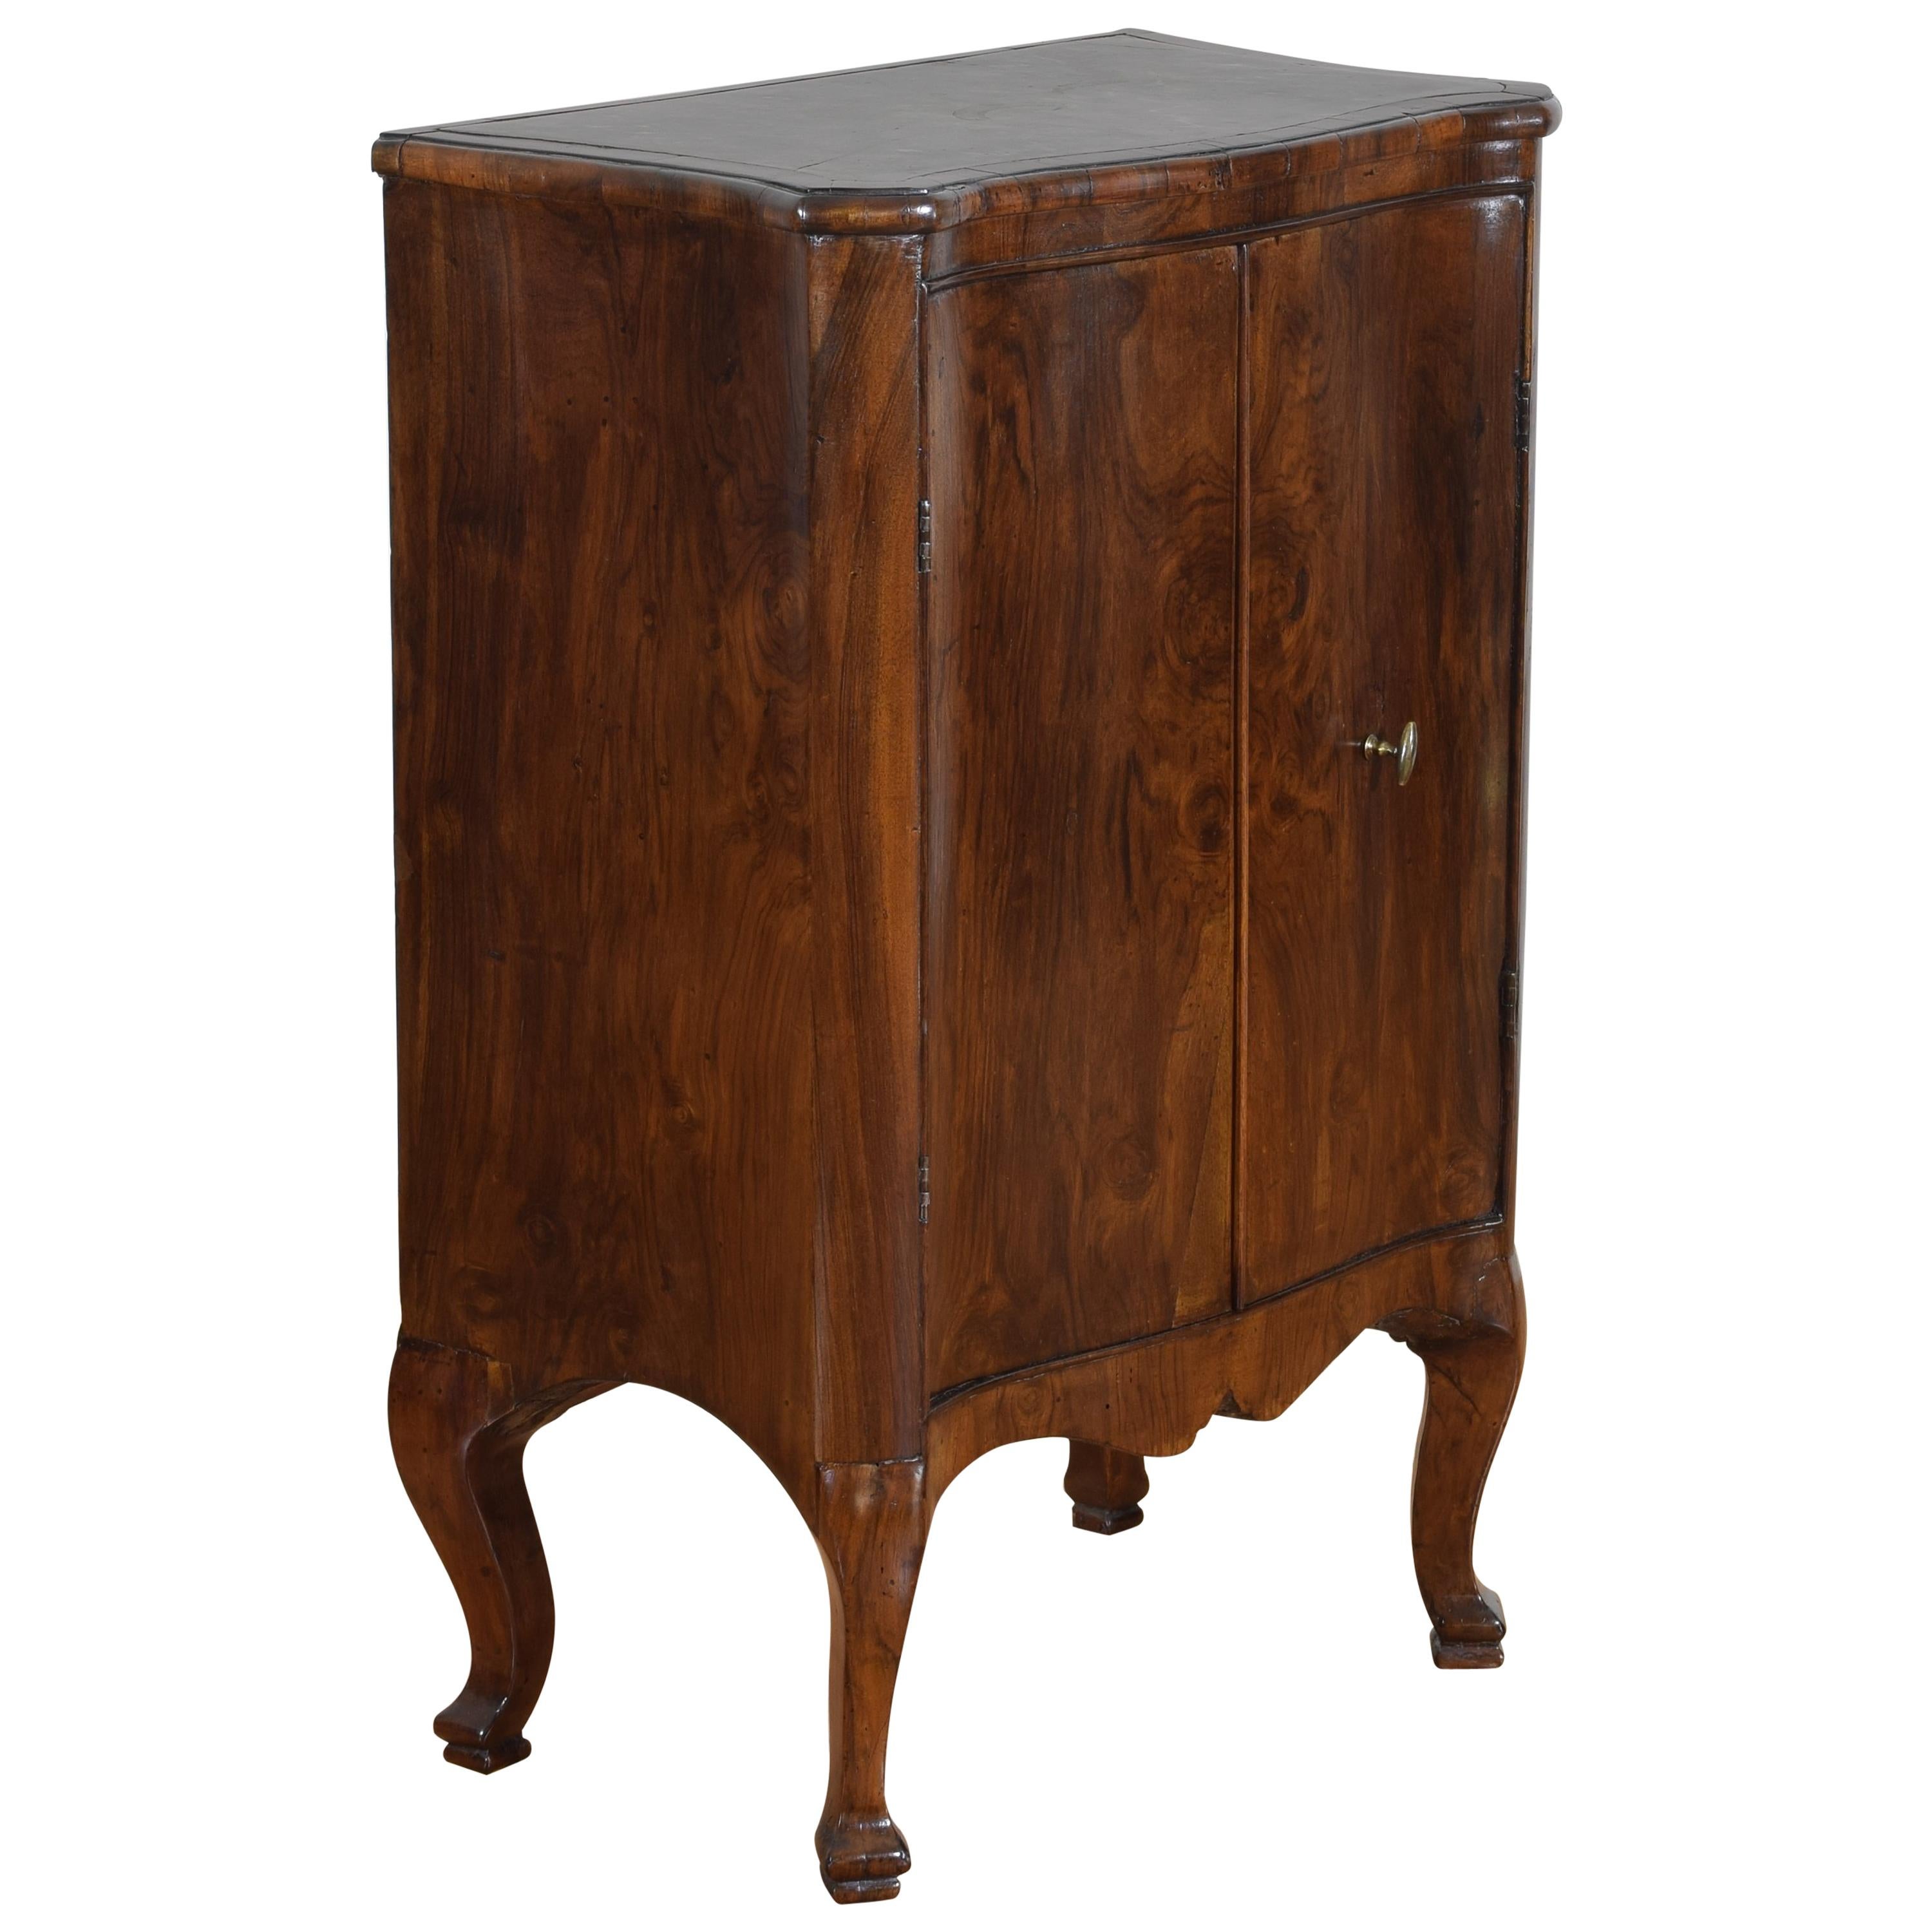 Italian, Venice, Shaped Walnut Cabinet with Marble Top, First Half 18th Century